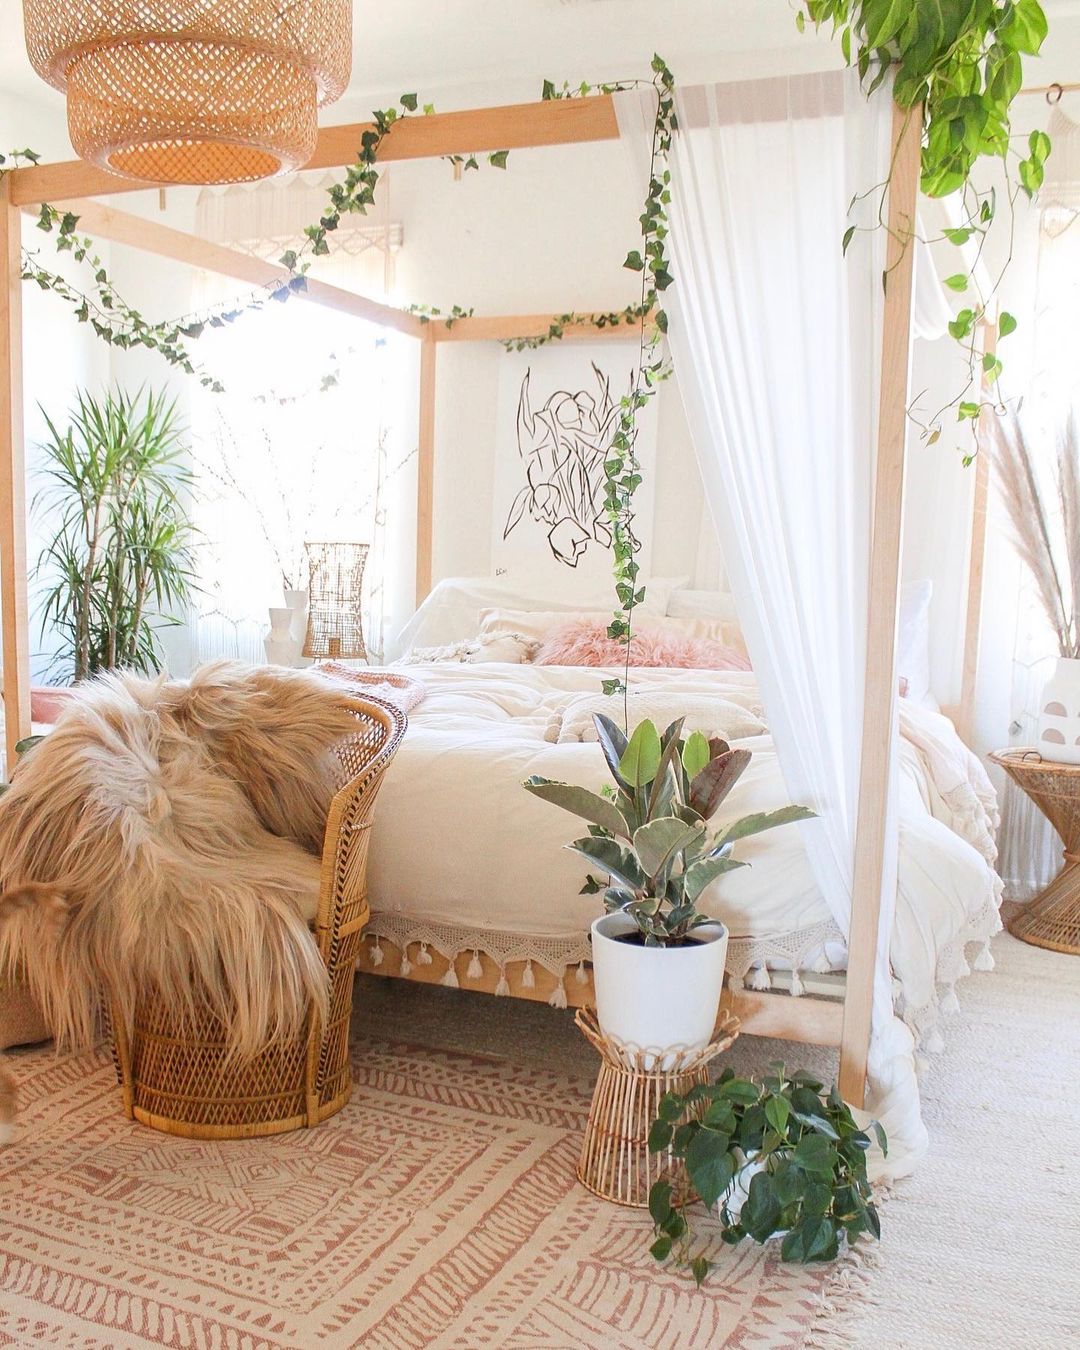 Light wood canopy bed in a bright Bohemian styled bedroom. Photo by Instagram user @dreaming_of_decor